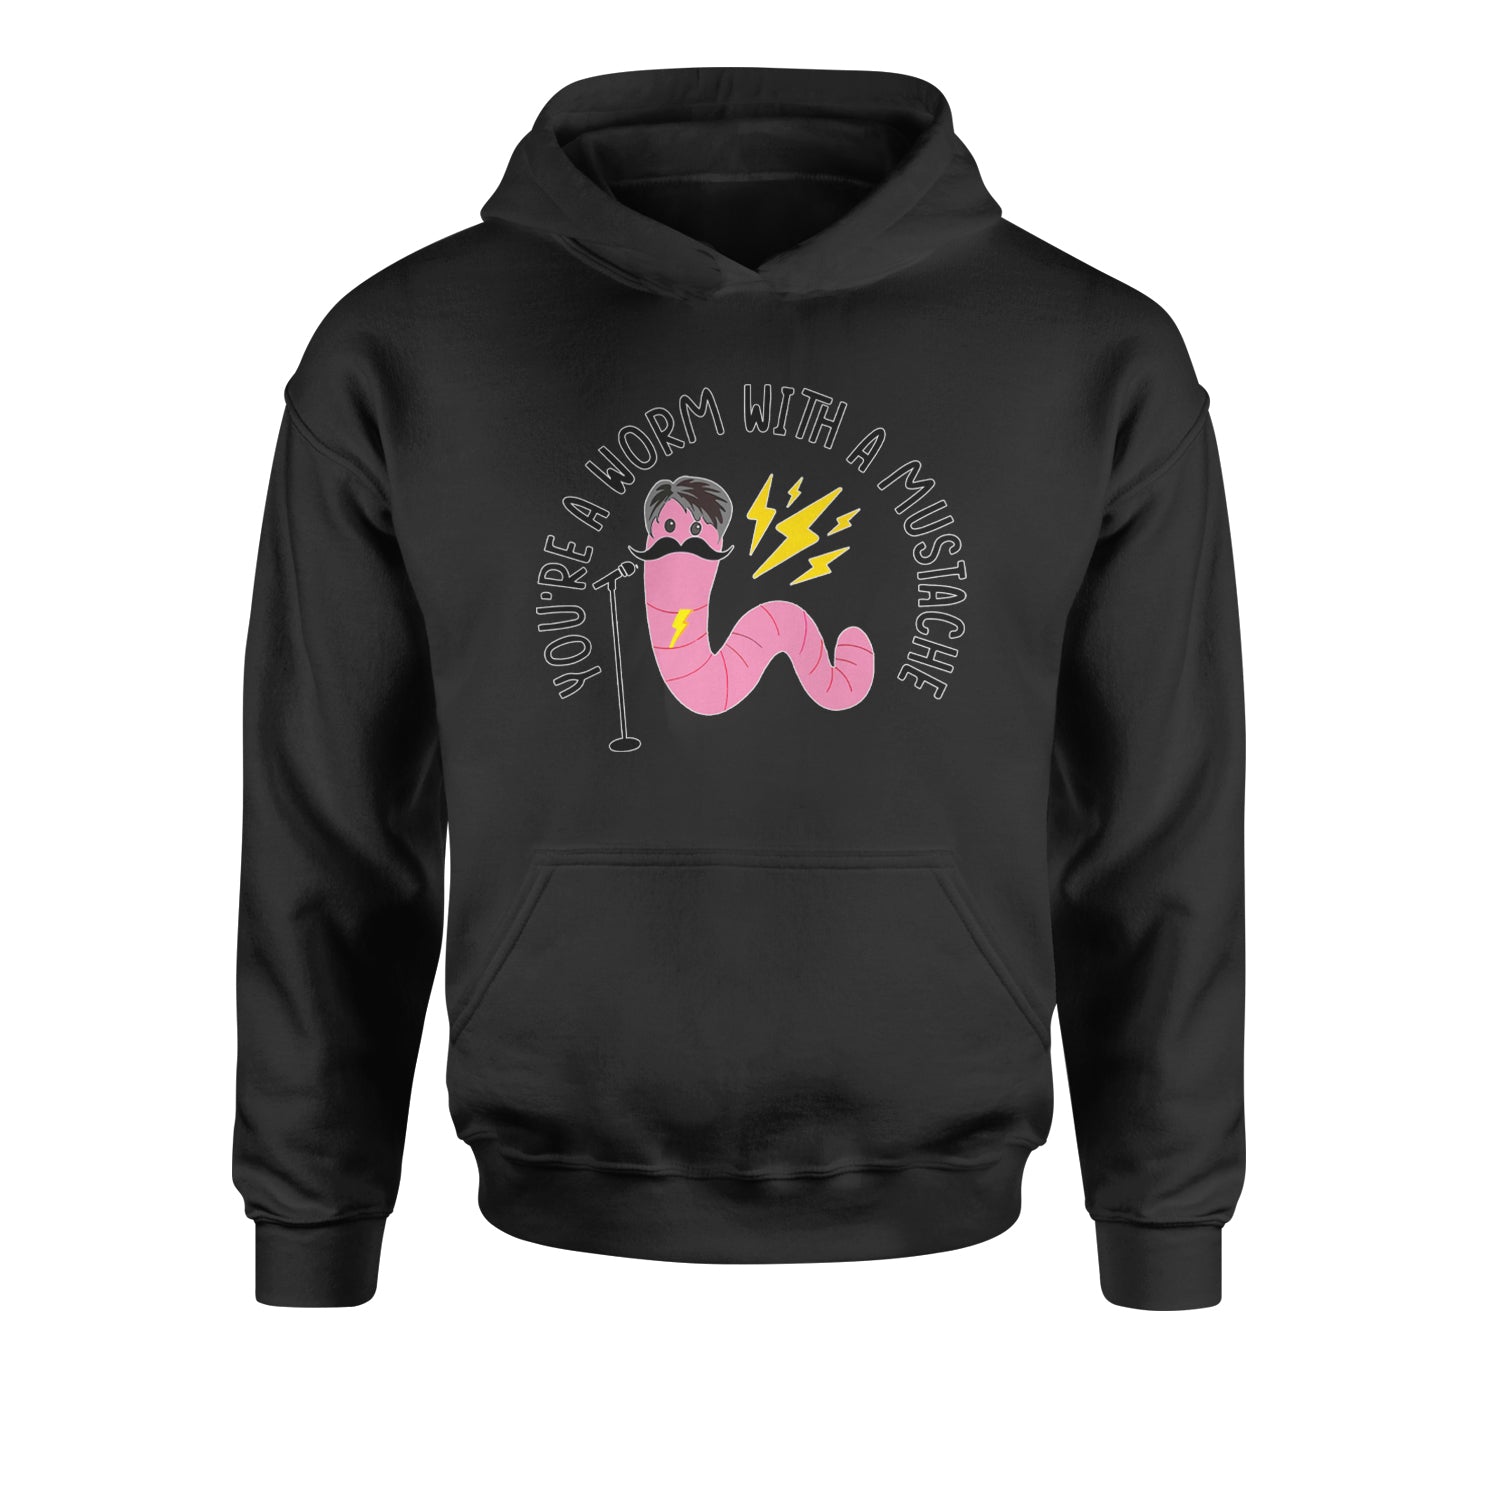 You're A Worm With A Mustache Tom Scandoval Youth-Sized Hoodie